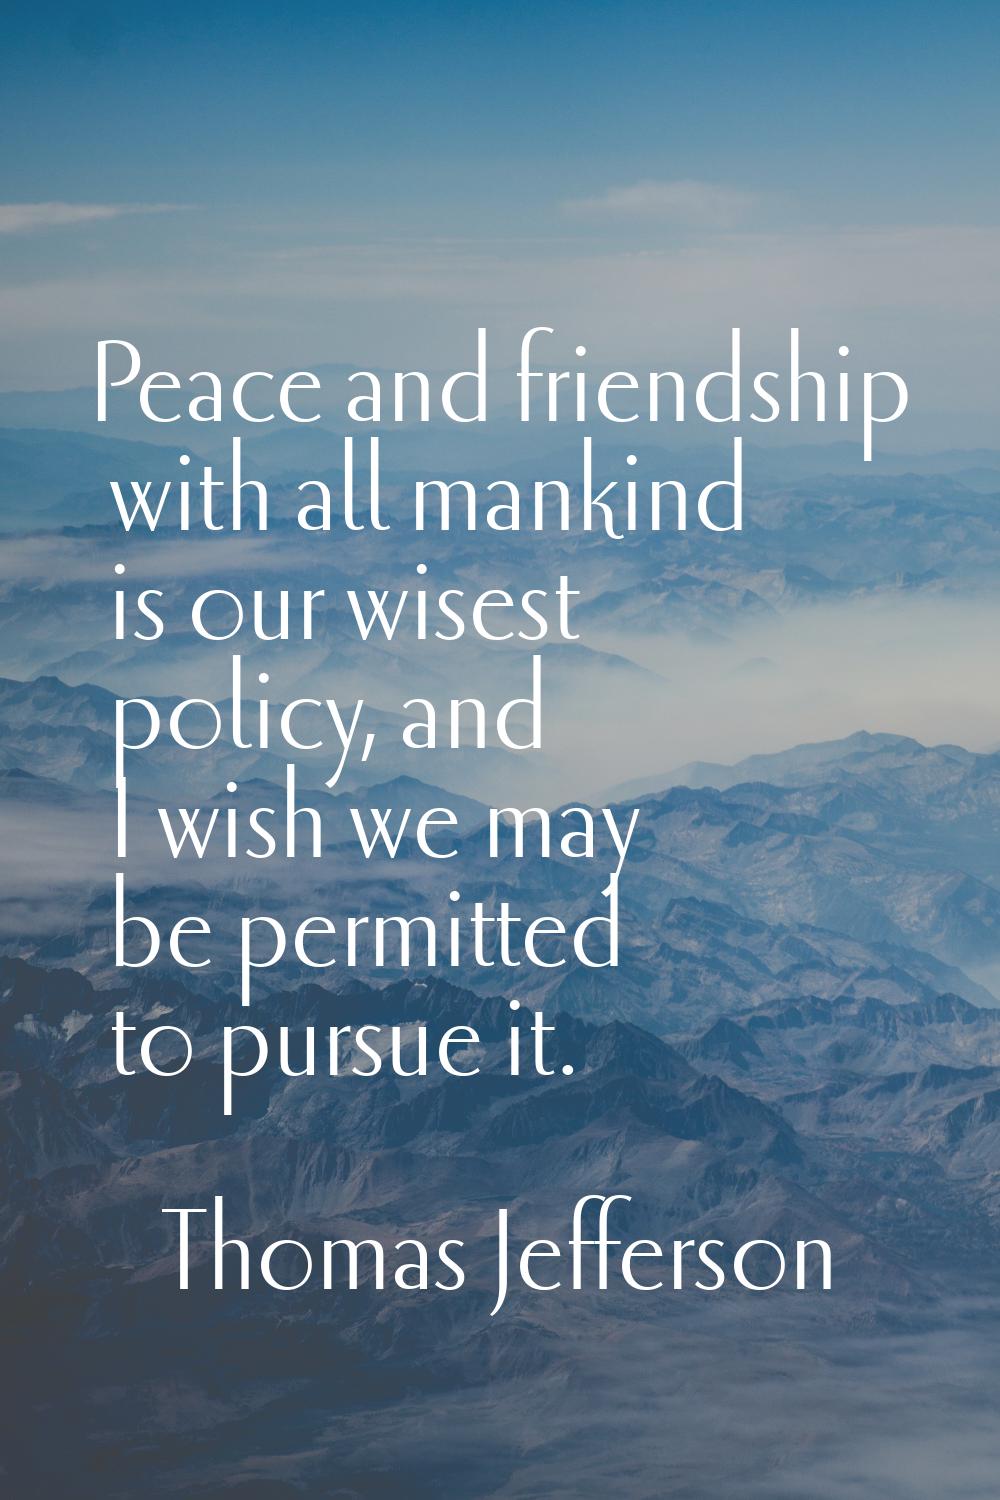 Peace and friendship with all mankind is our wisest policy, and I wish we may be permitted to pursu